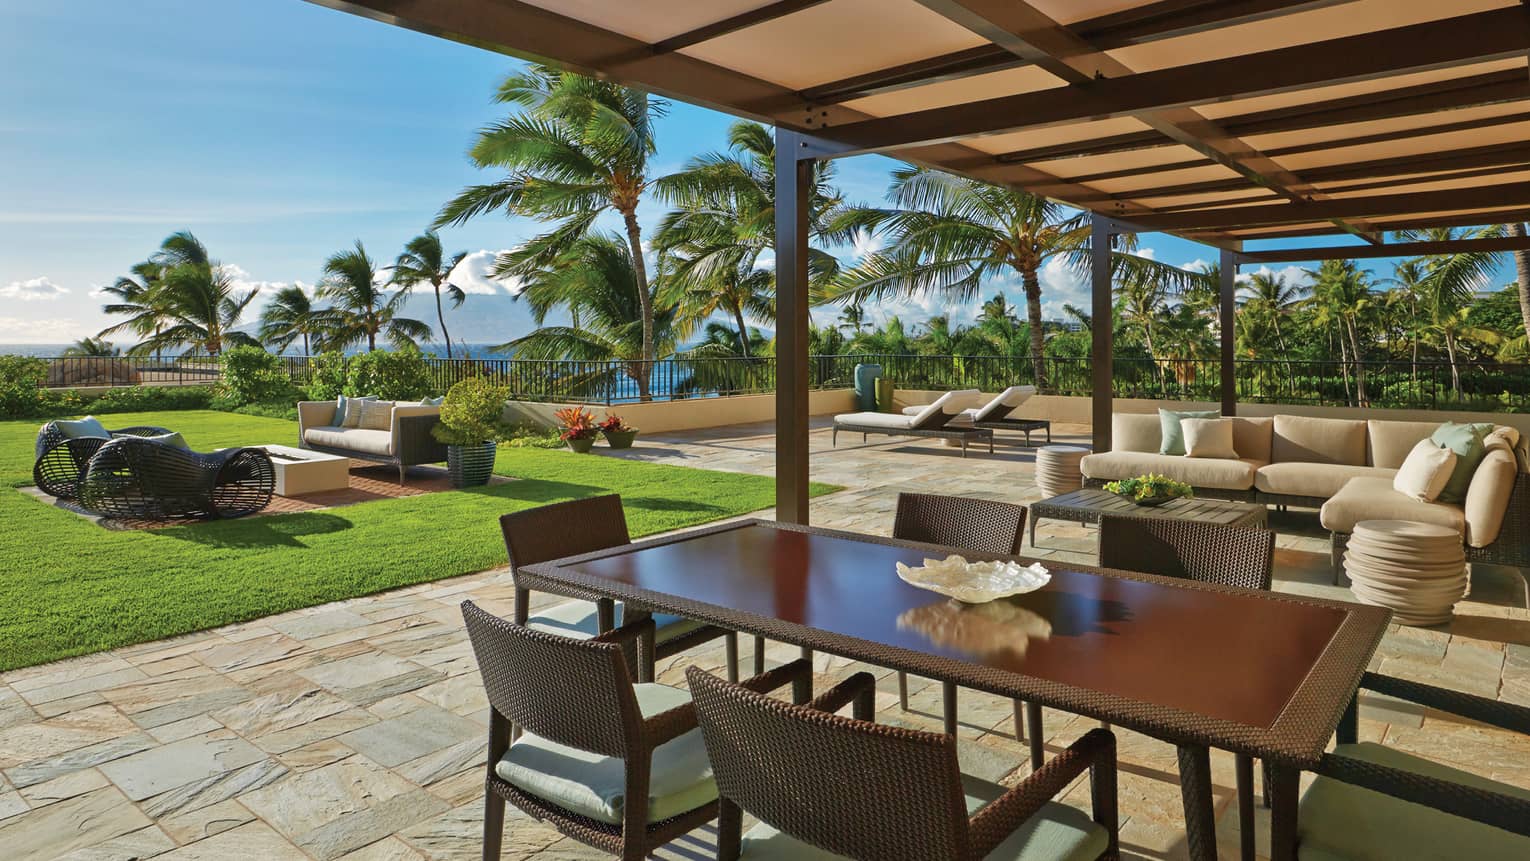 Lokelani Suite Outdoor Area with dining table and view of the ocean